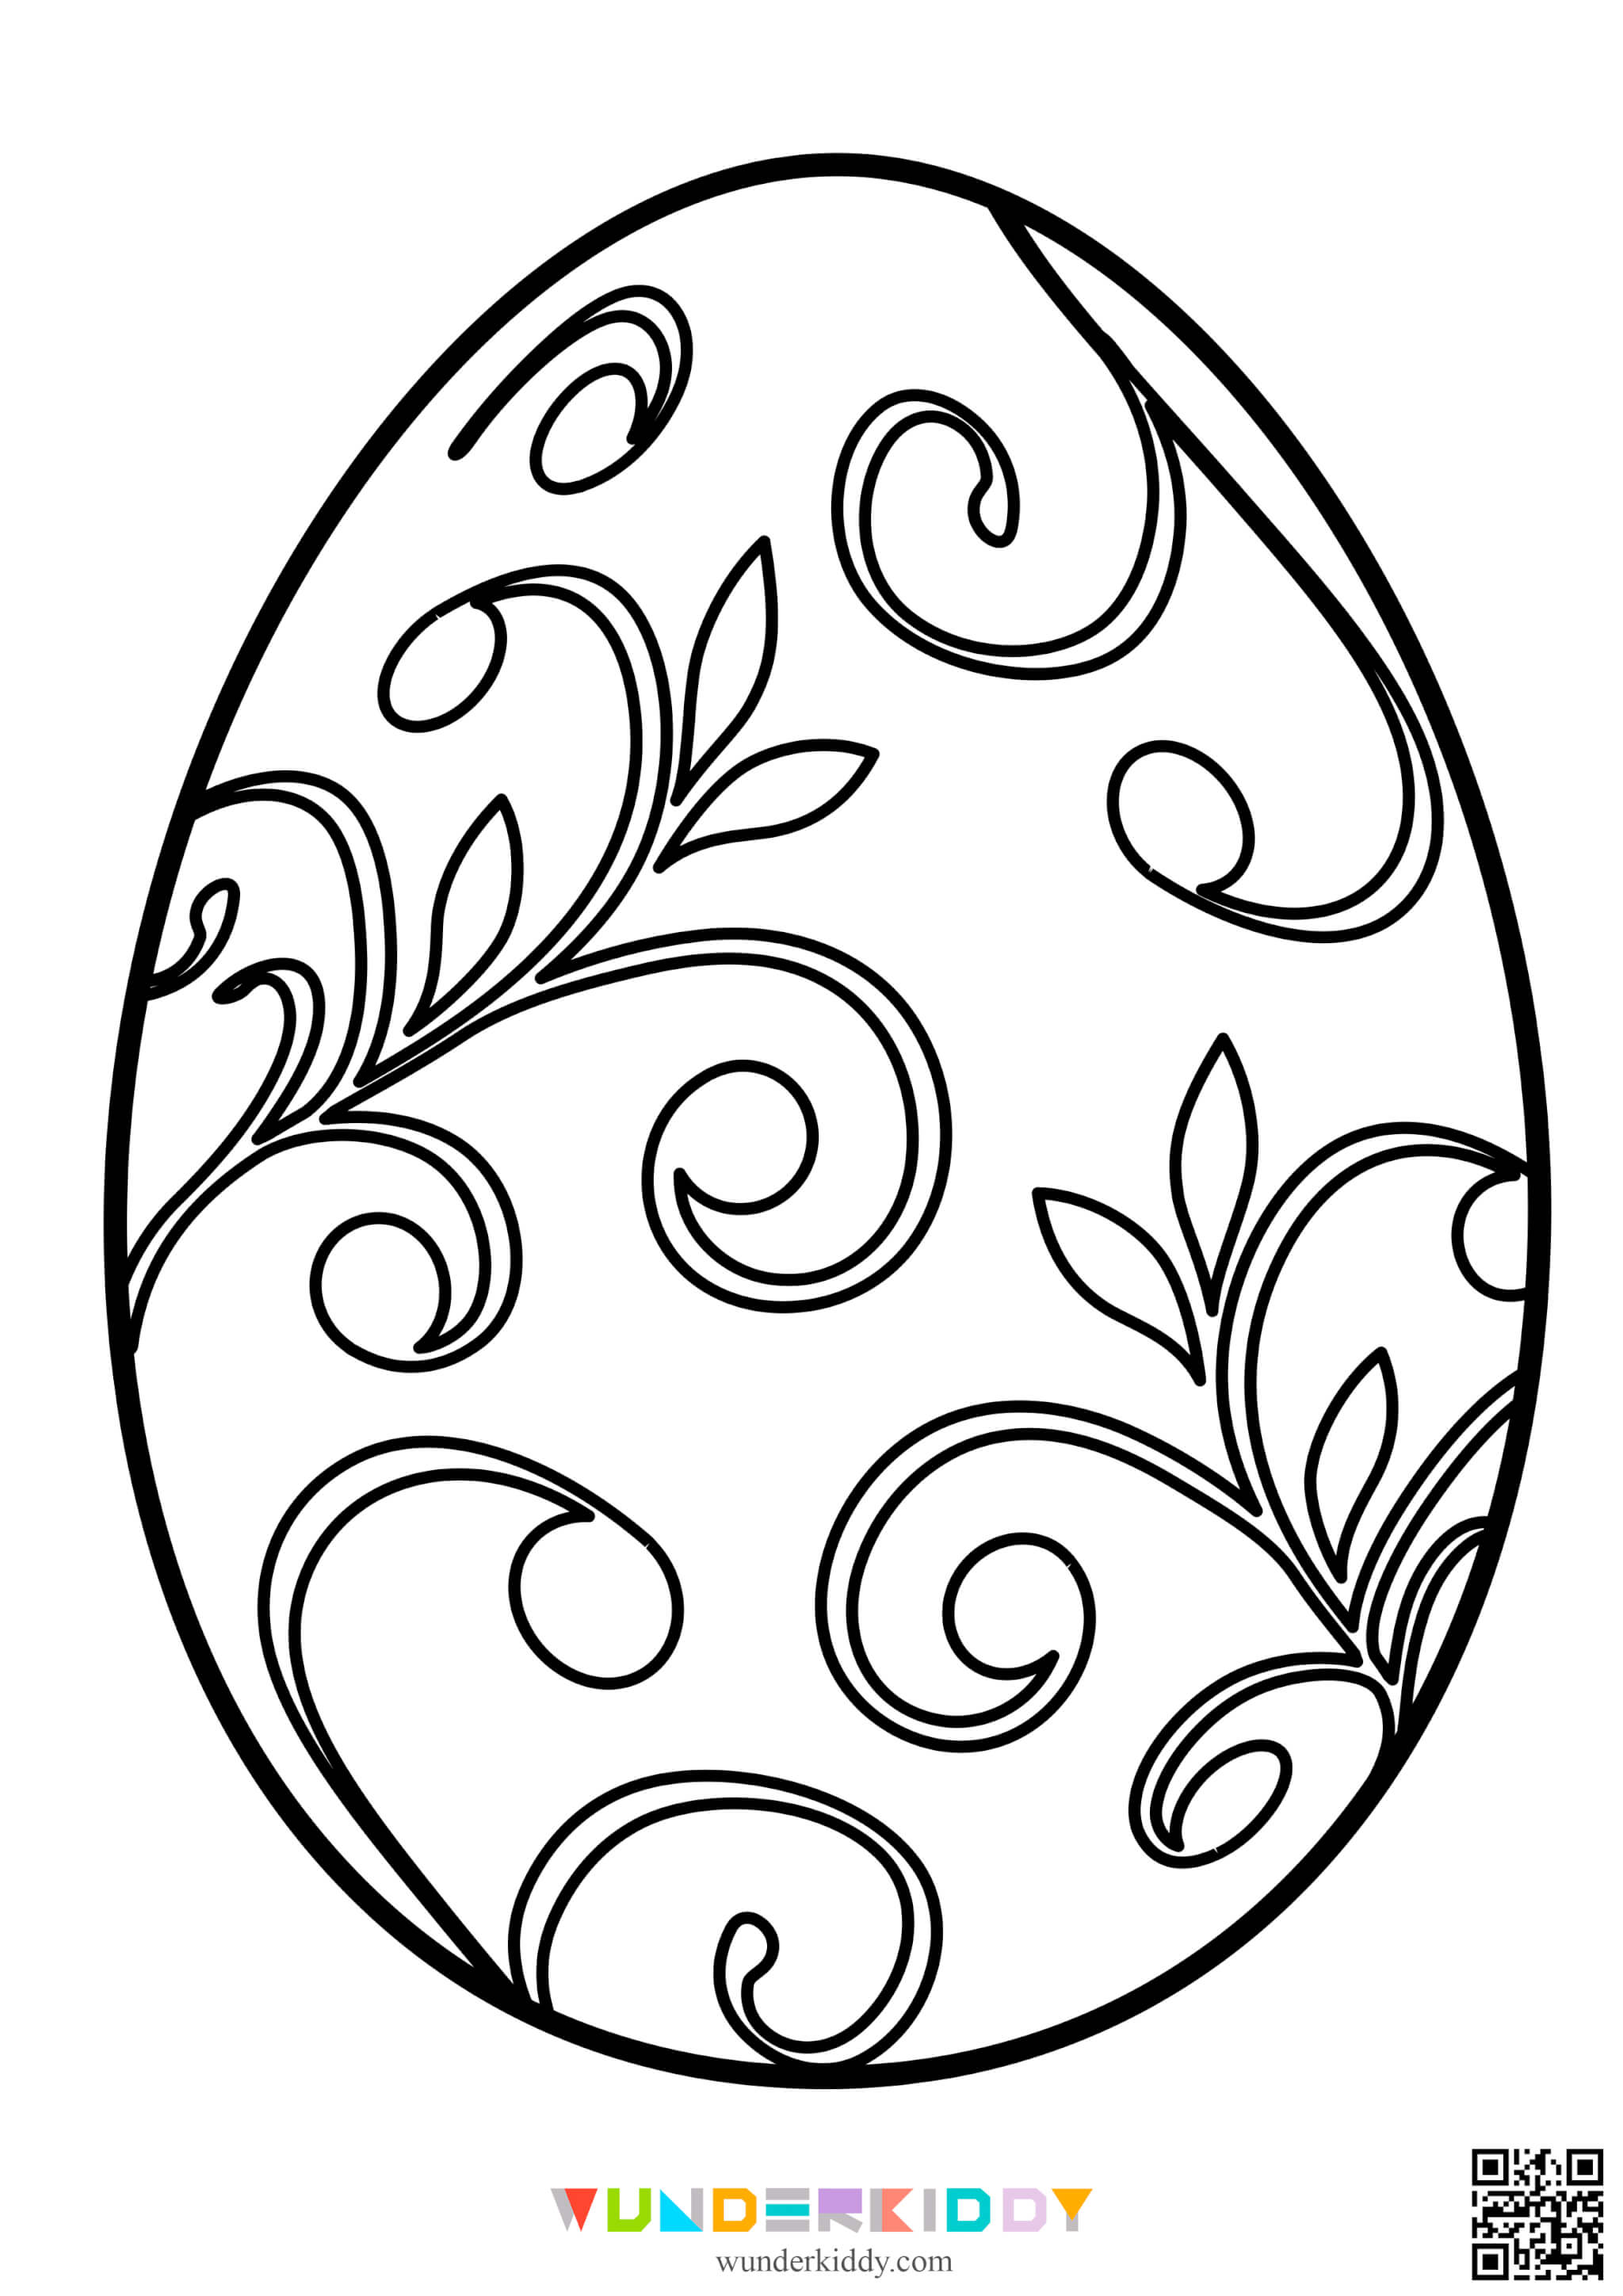 Cut Out Easter Egg Template